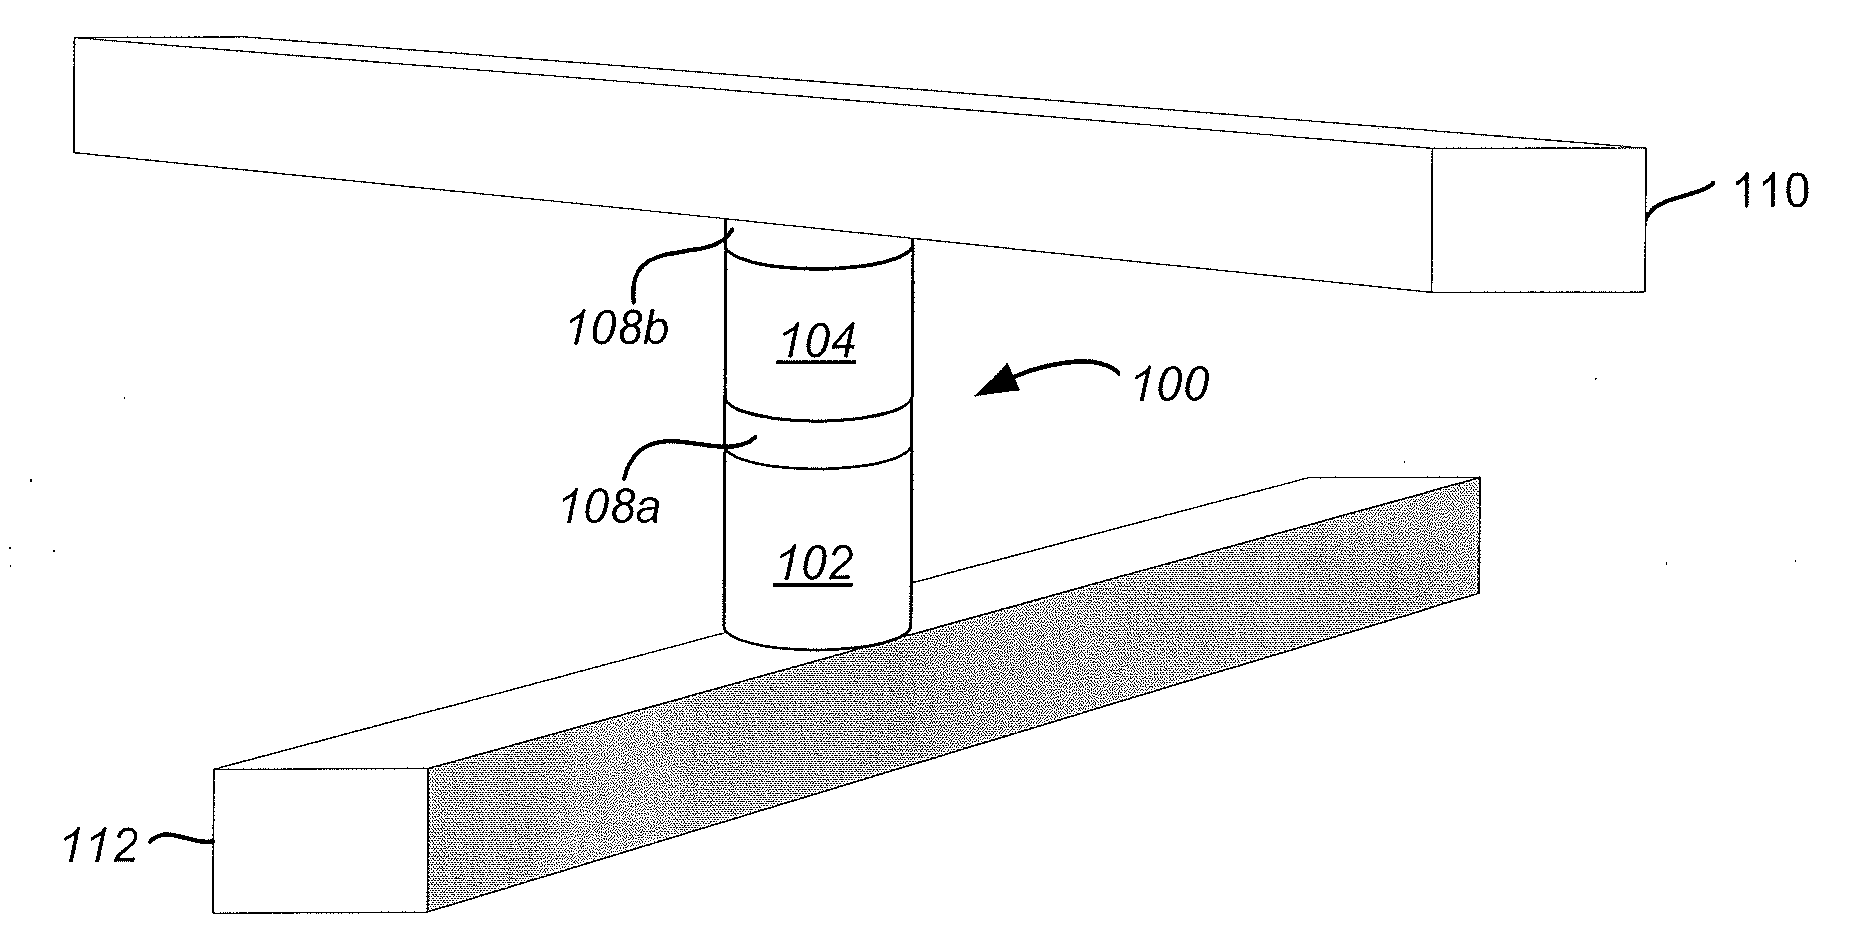 Optimized electrodes for re-ram